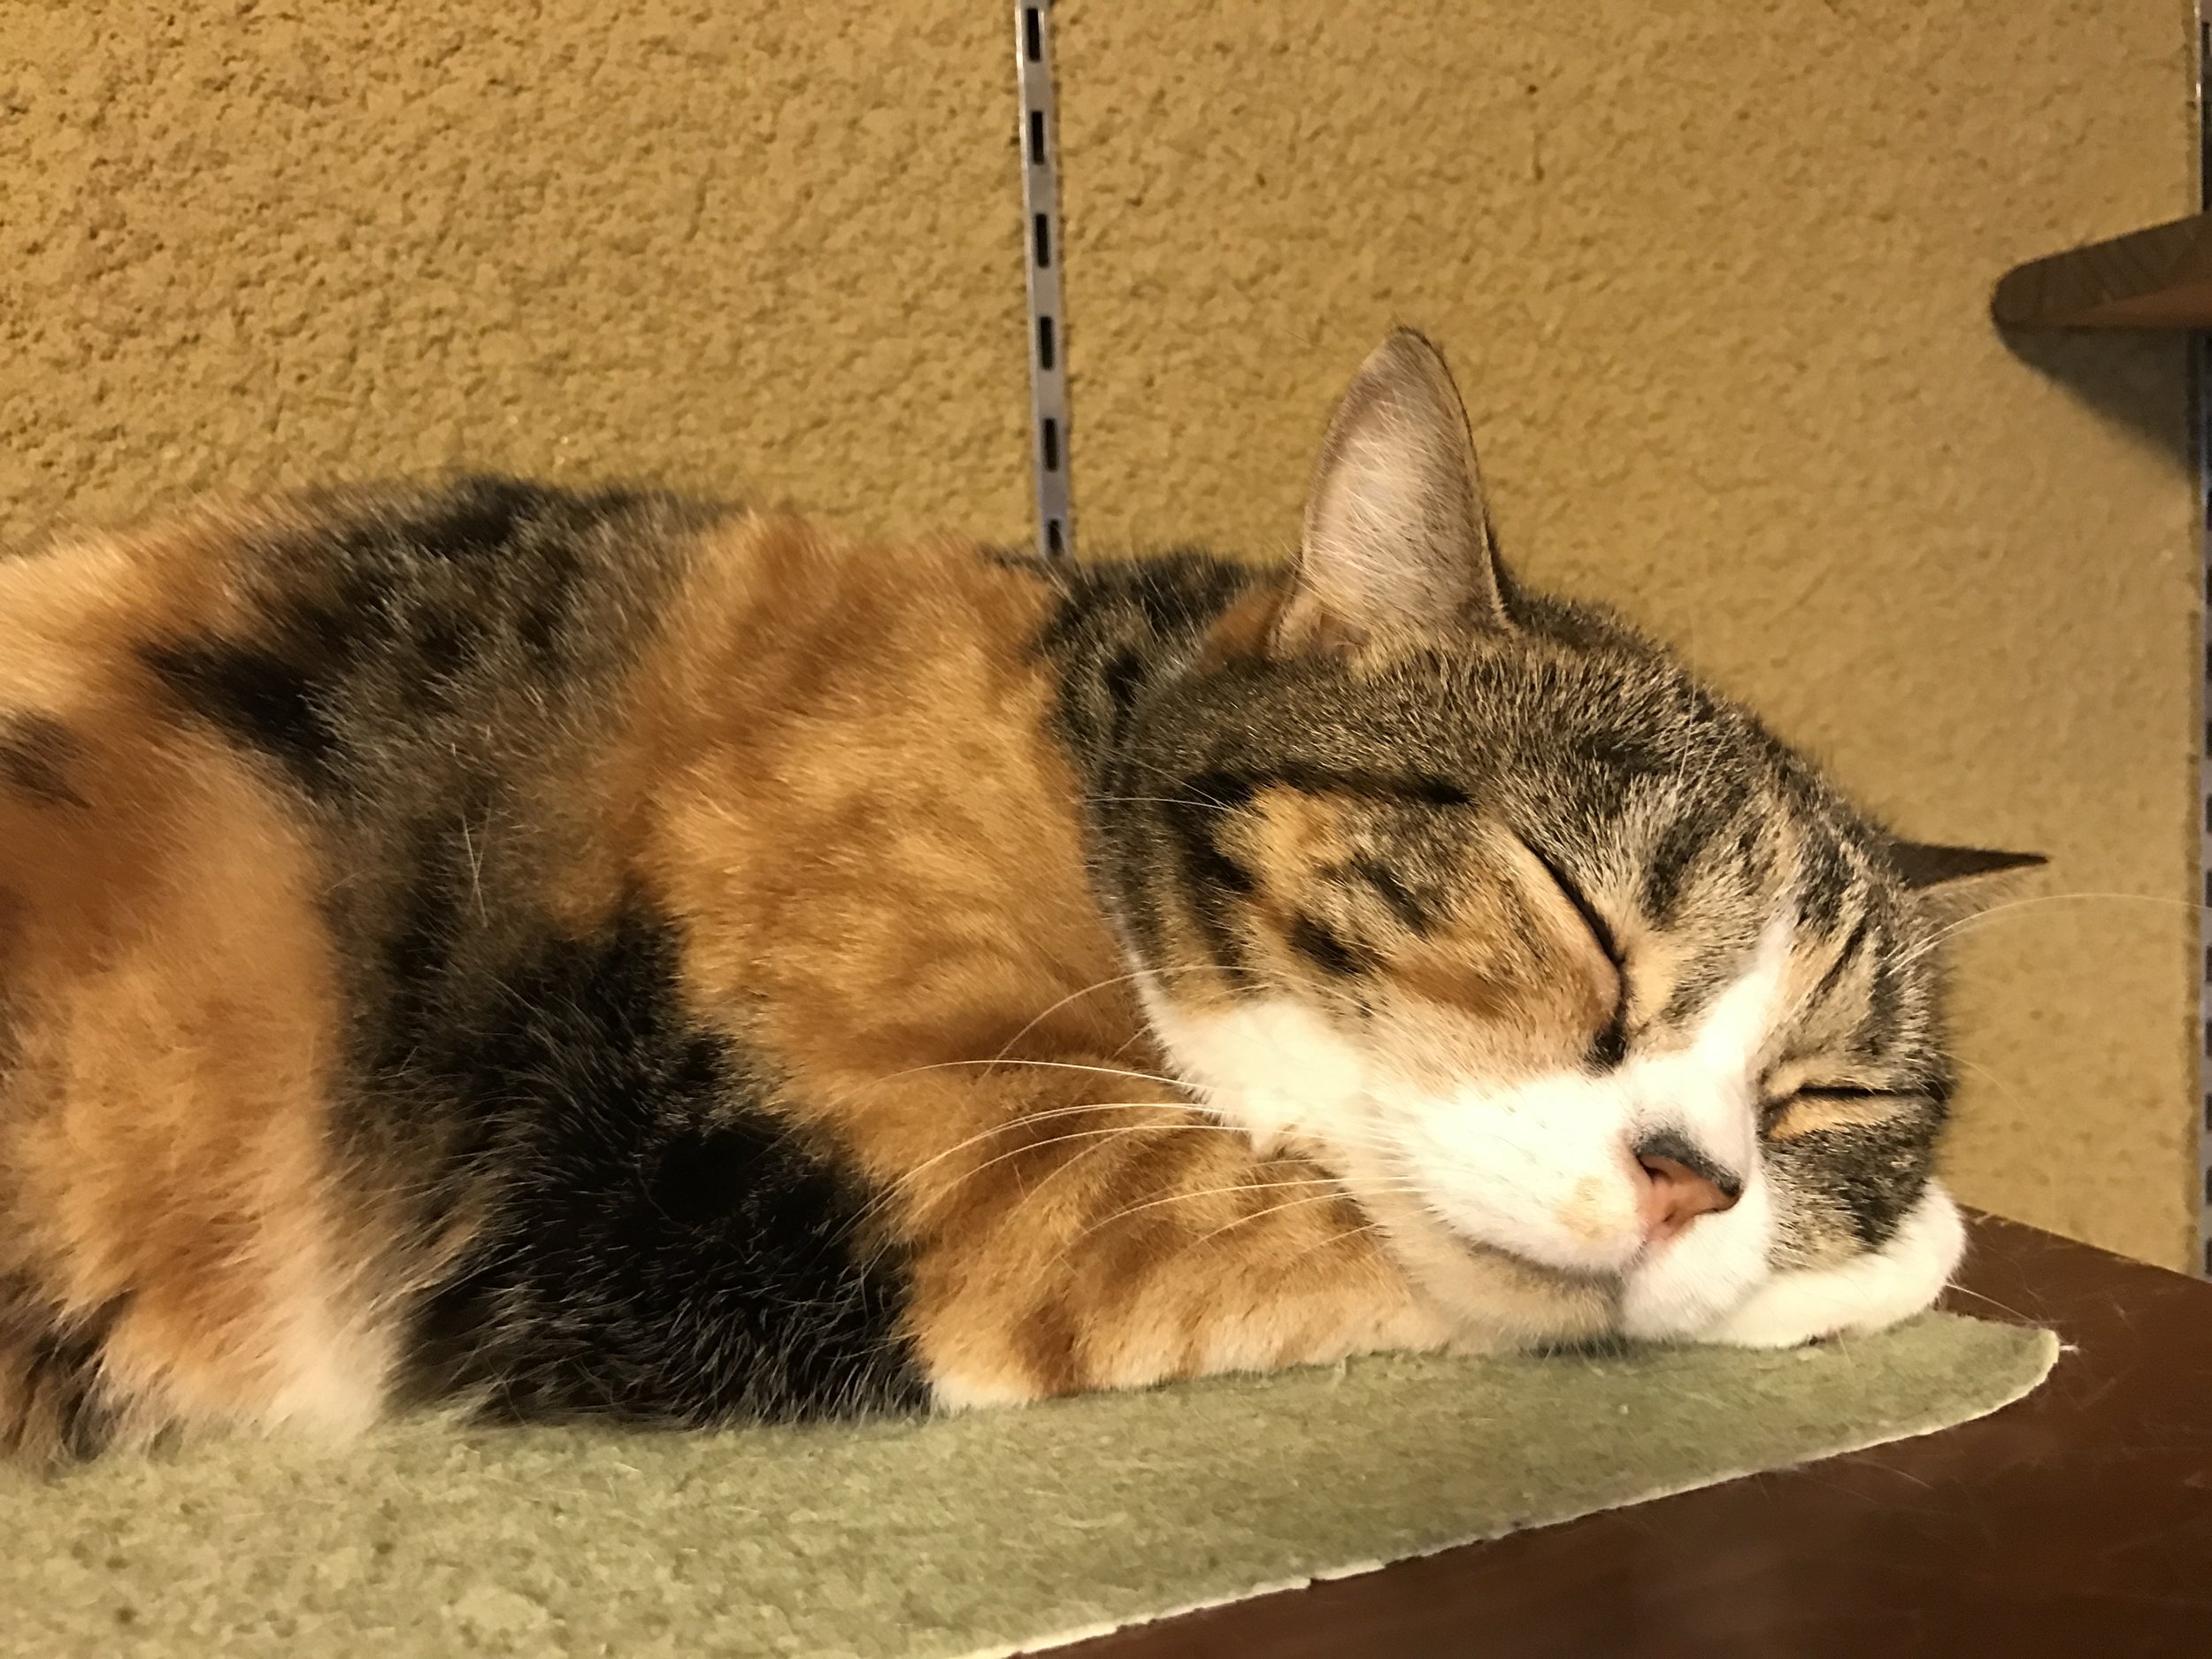 Located in the Kita neighborhood, there are a wide variety of cats in residence at Neko no Jikan